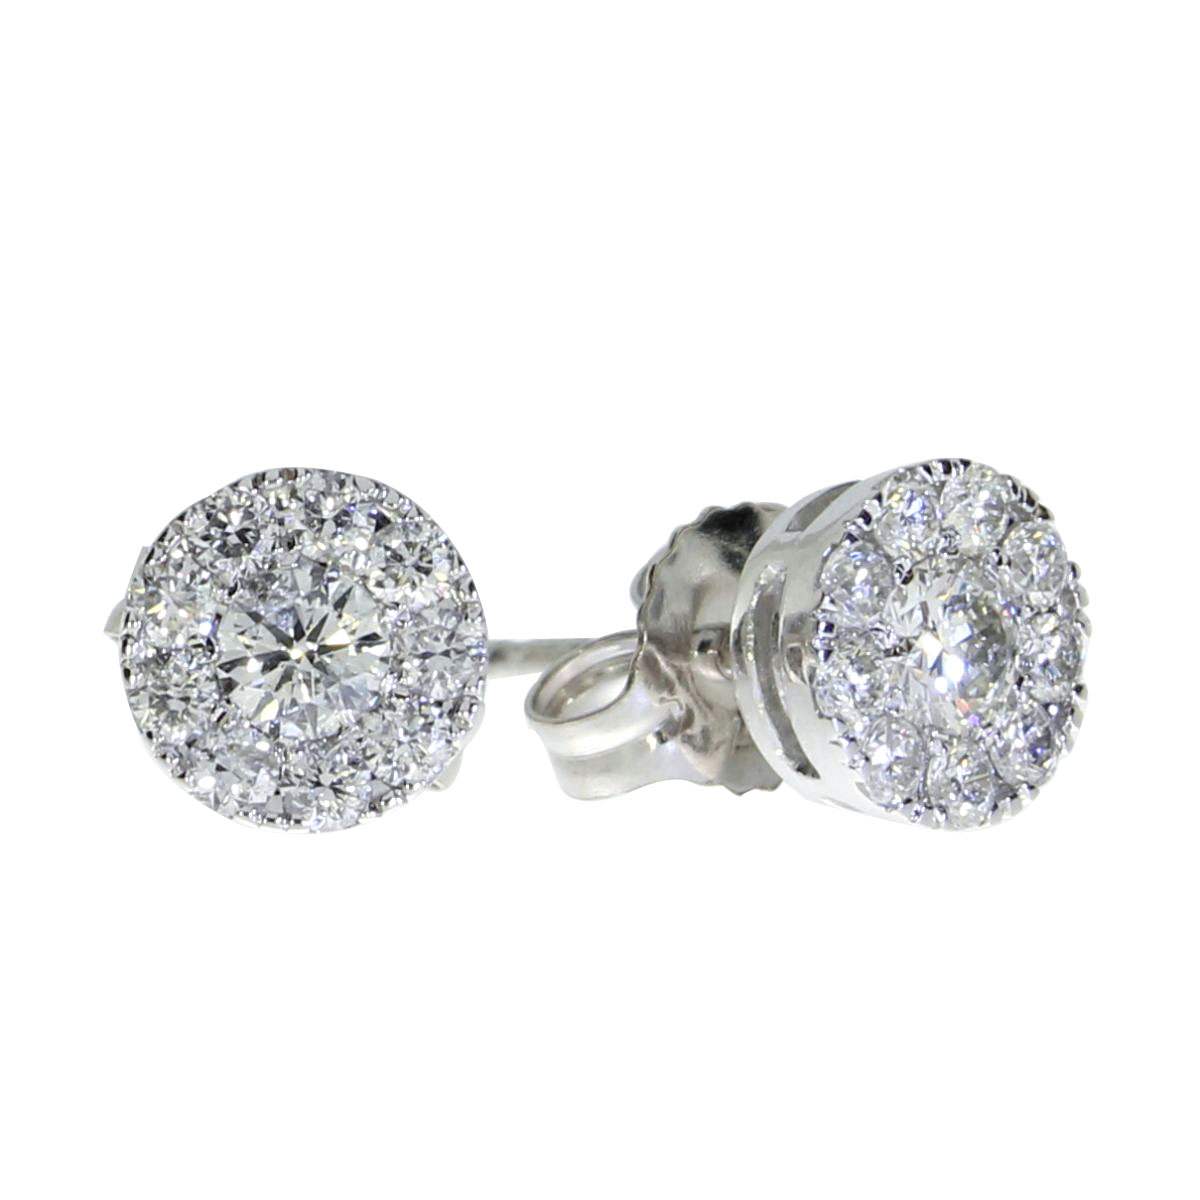 JCX2497: Gorgeous 14k white gold earrings with a .51 total carat cluster of shimmering high quality diamonds.